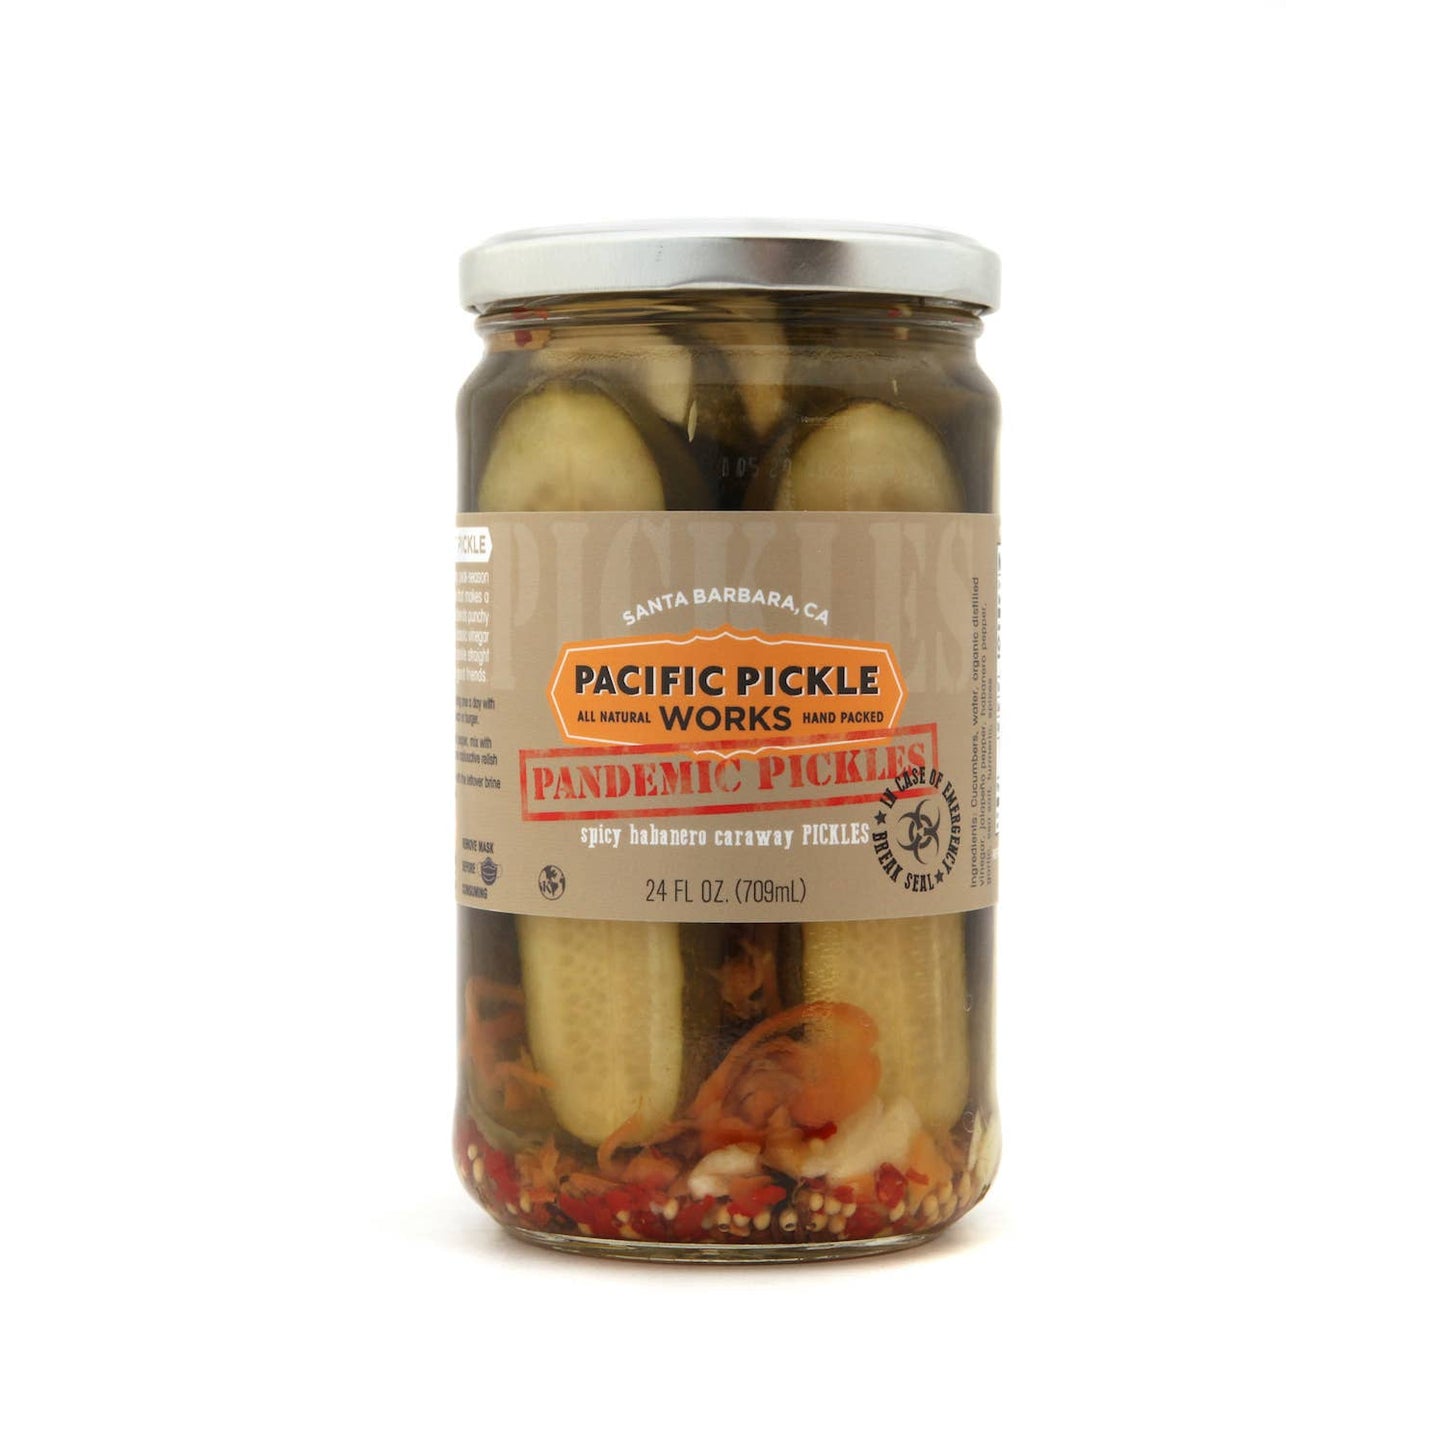 Pacific Pickle Works - Pandemic Pickles - NEW!